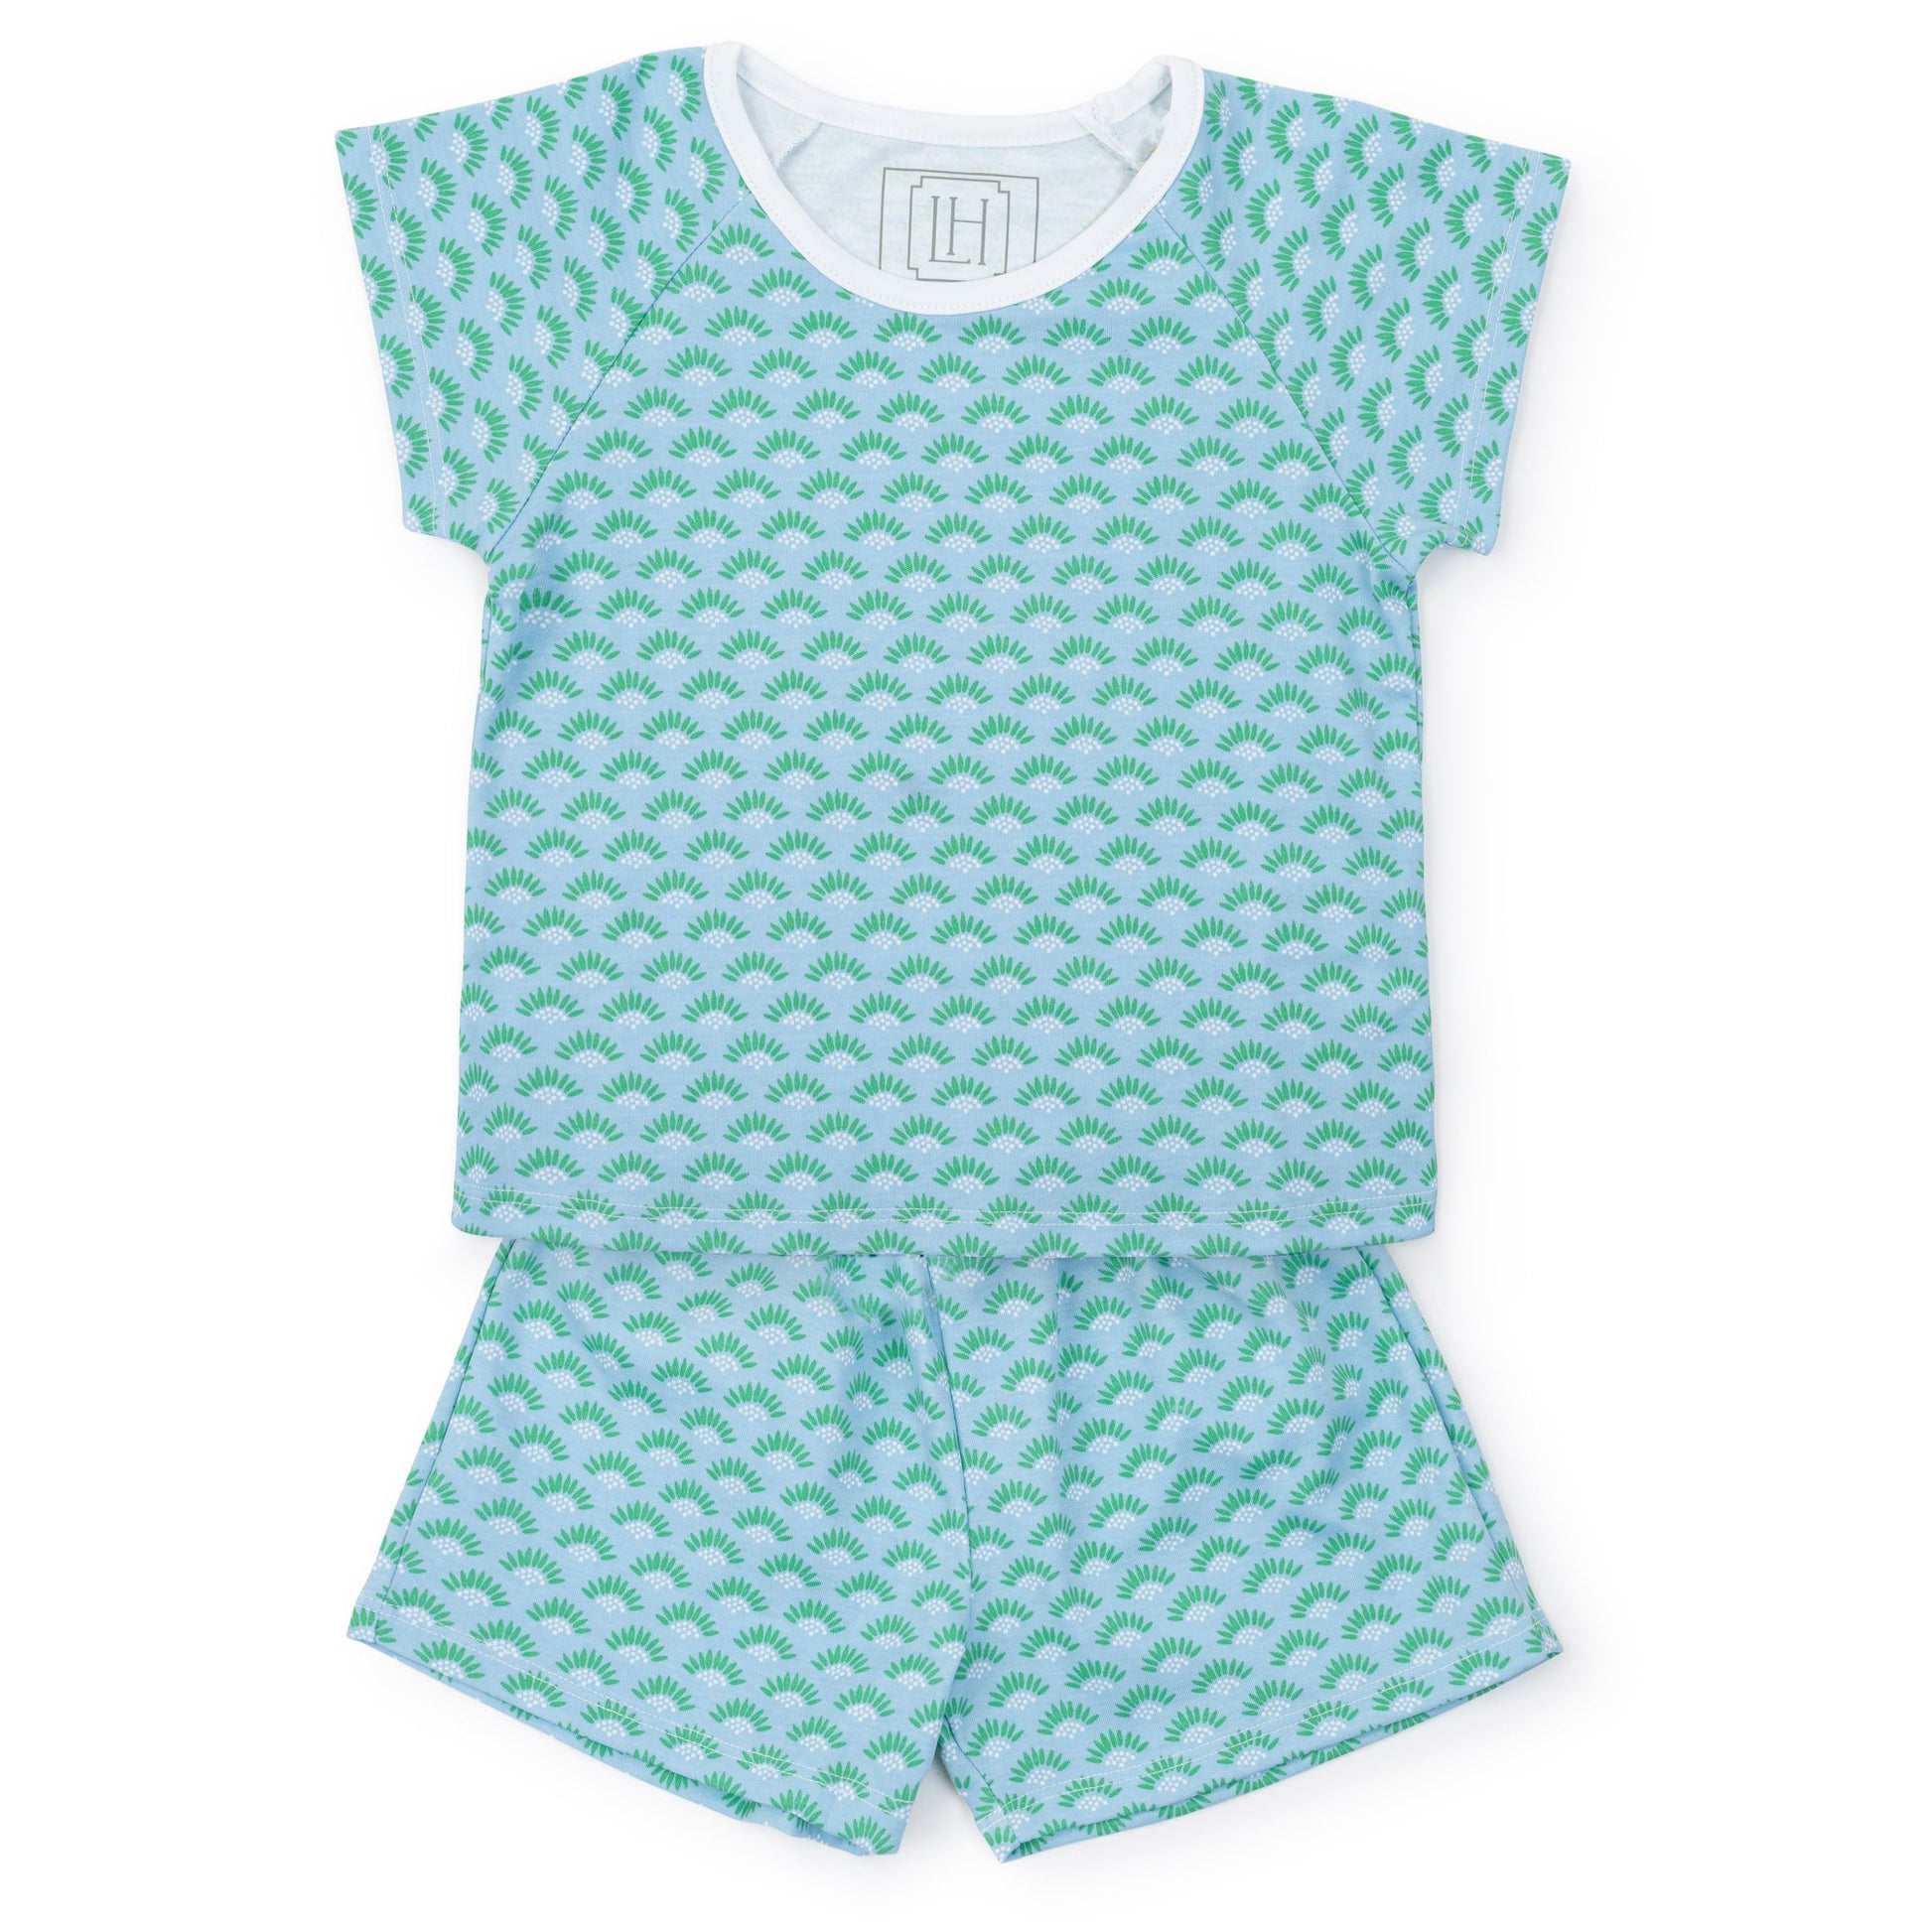 Lila and Hayes Emery Girls' Pima Cotton Short Set - Cool Blooms